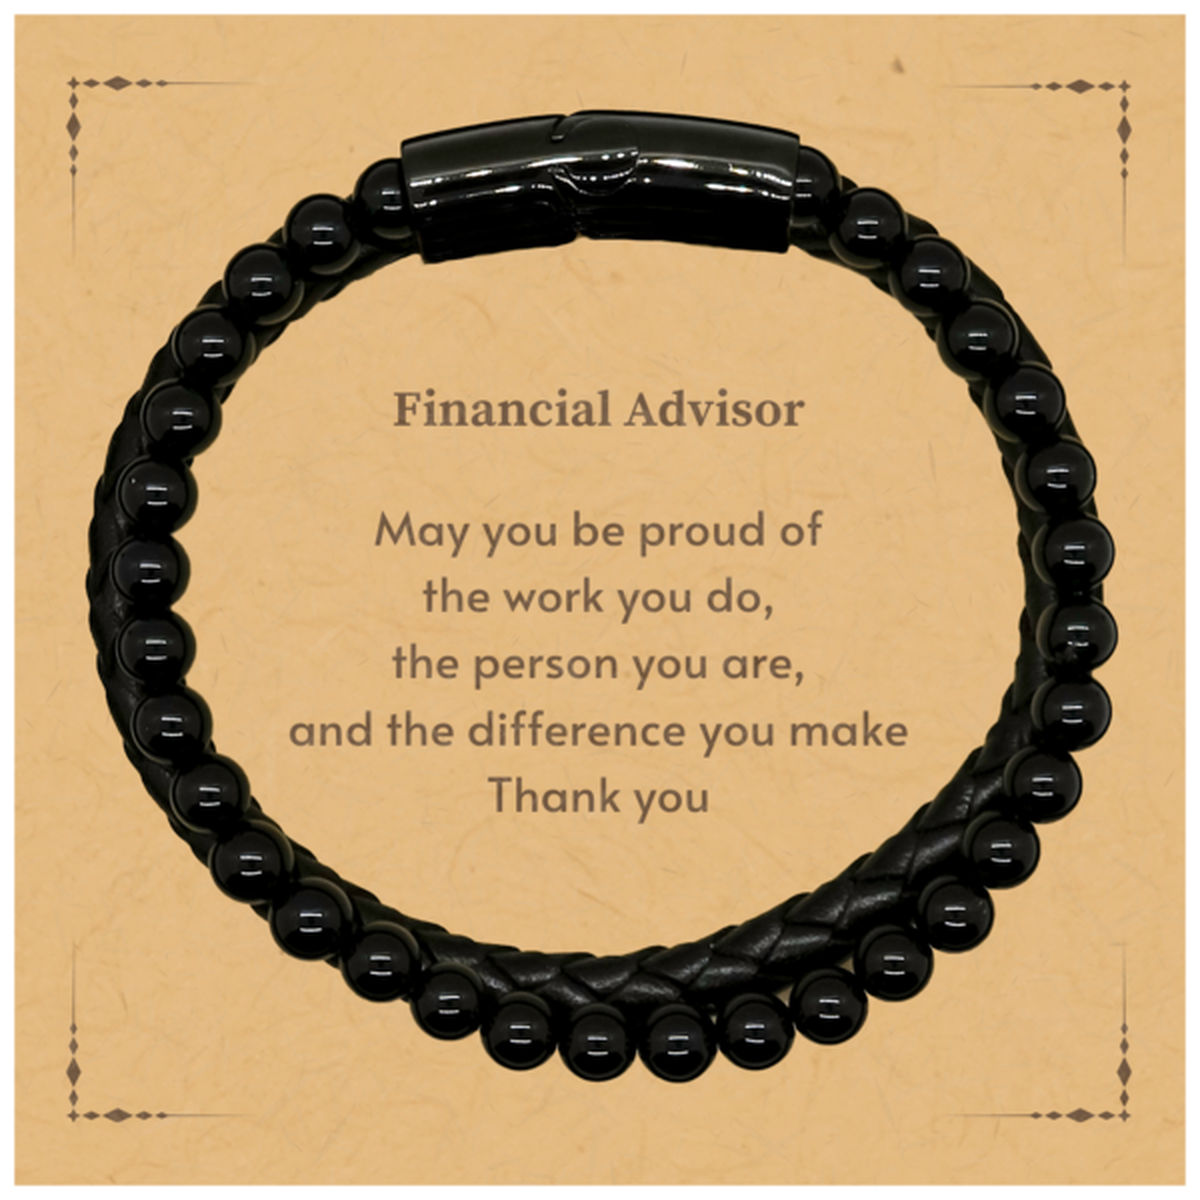 Heartwarming Stone Leather Bracelets Retirement Coworkers Gifts for Financial Advisor, Financial Advisor May You be proud of the work you do, the person you are Gifts for Boss Men Women Friends